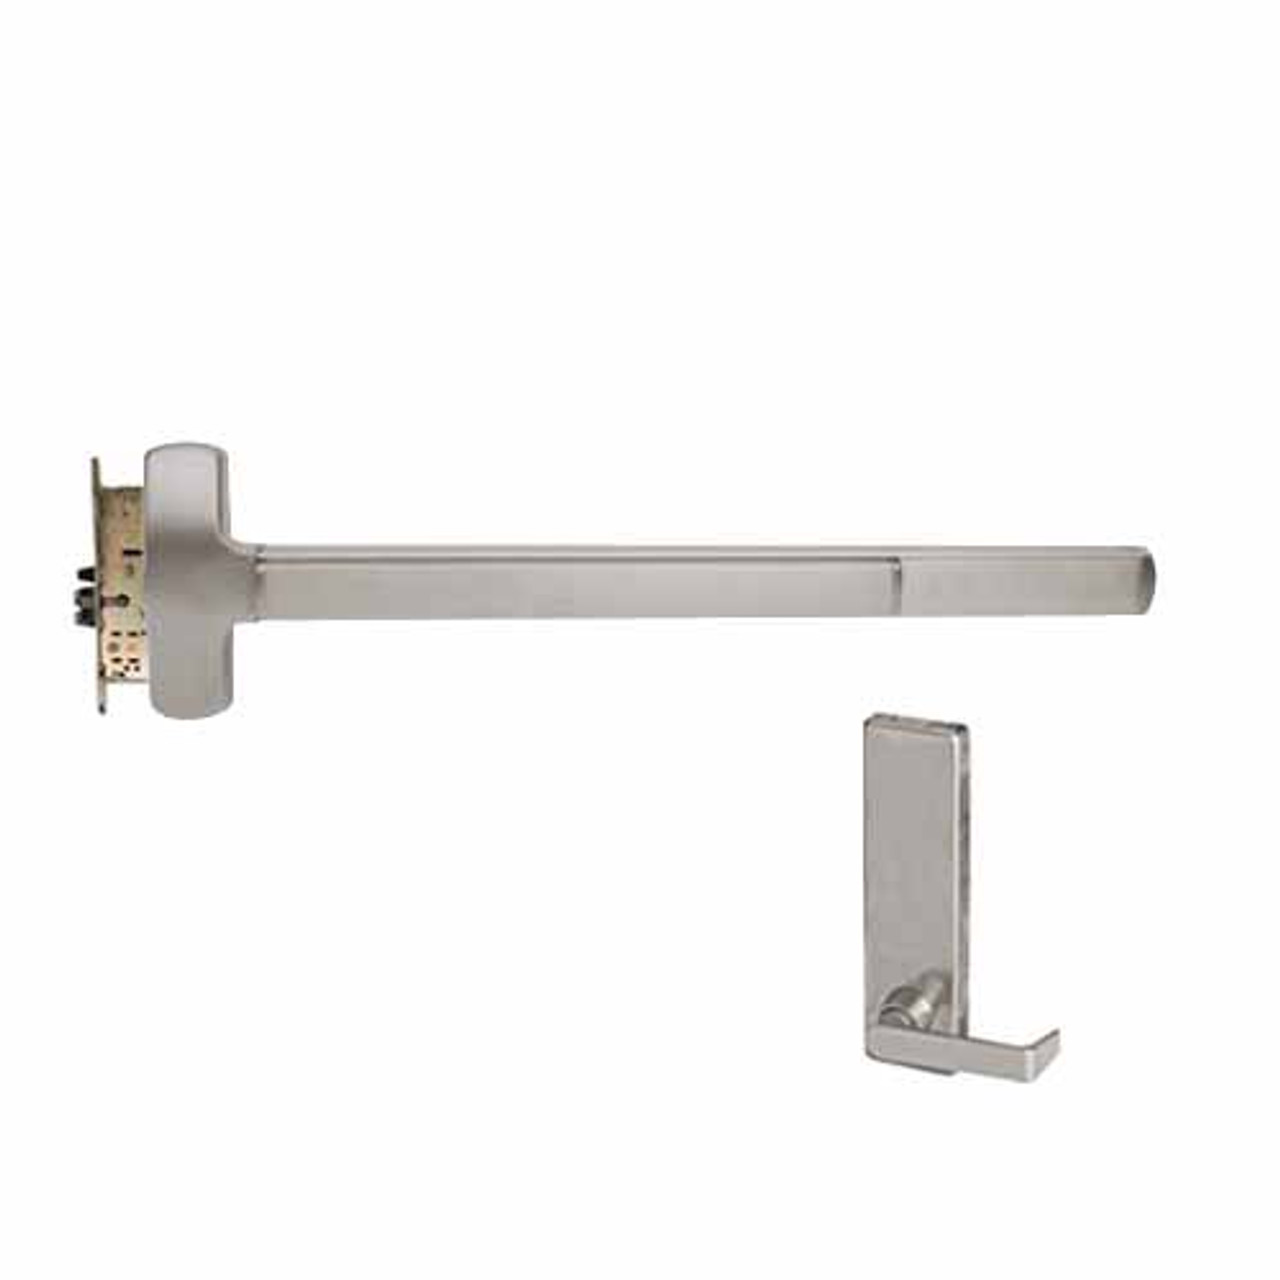 F-25-M-L-BE-Dane-US32D-4-RHR Falcon Exit Device in Satin Stainless Steel